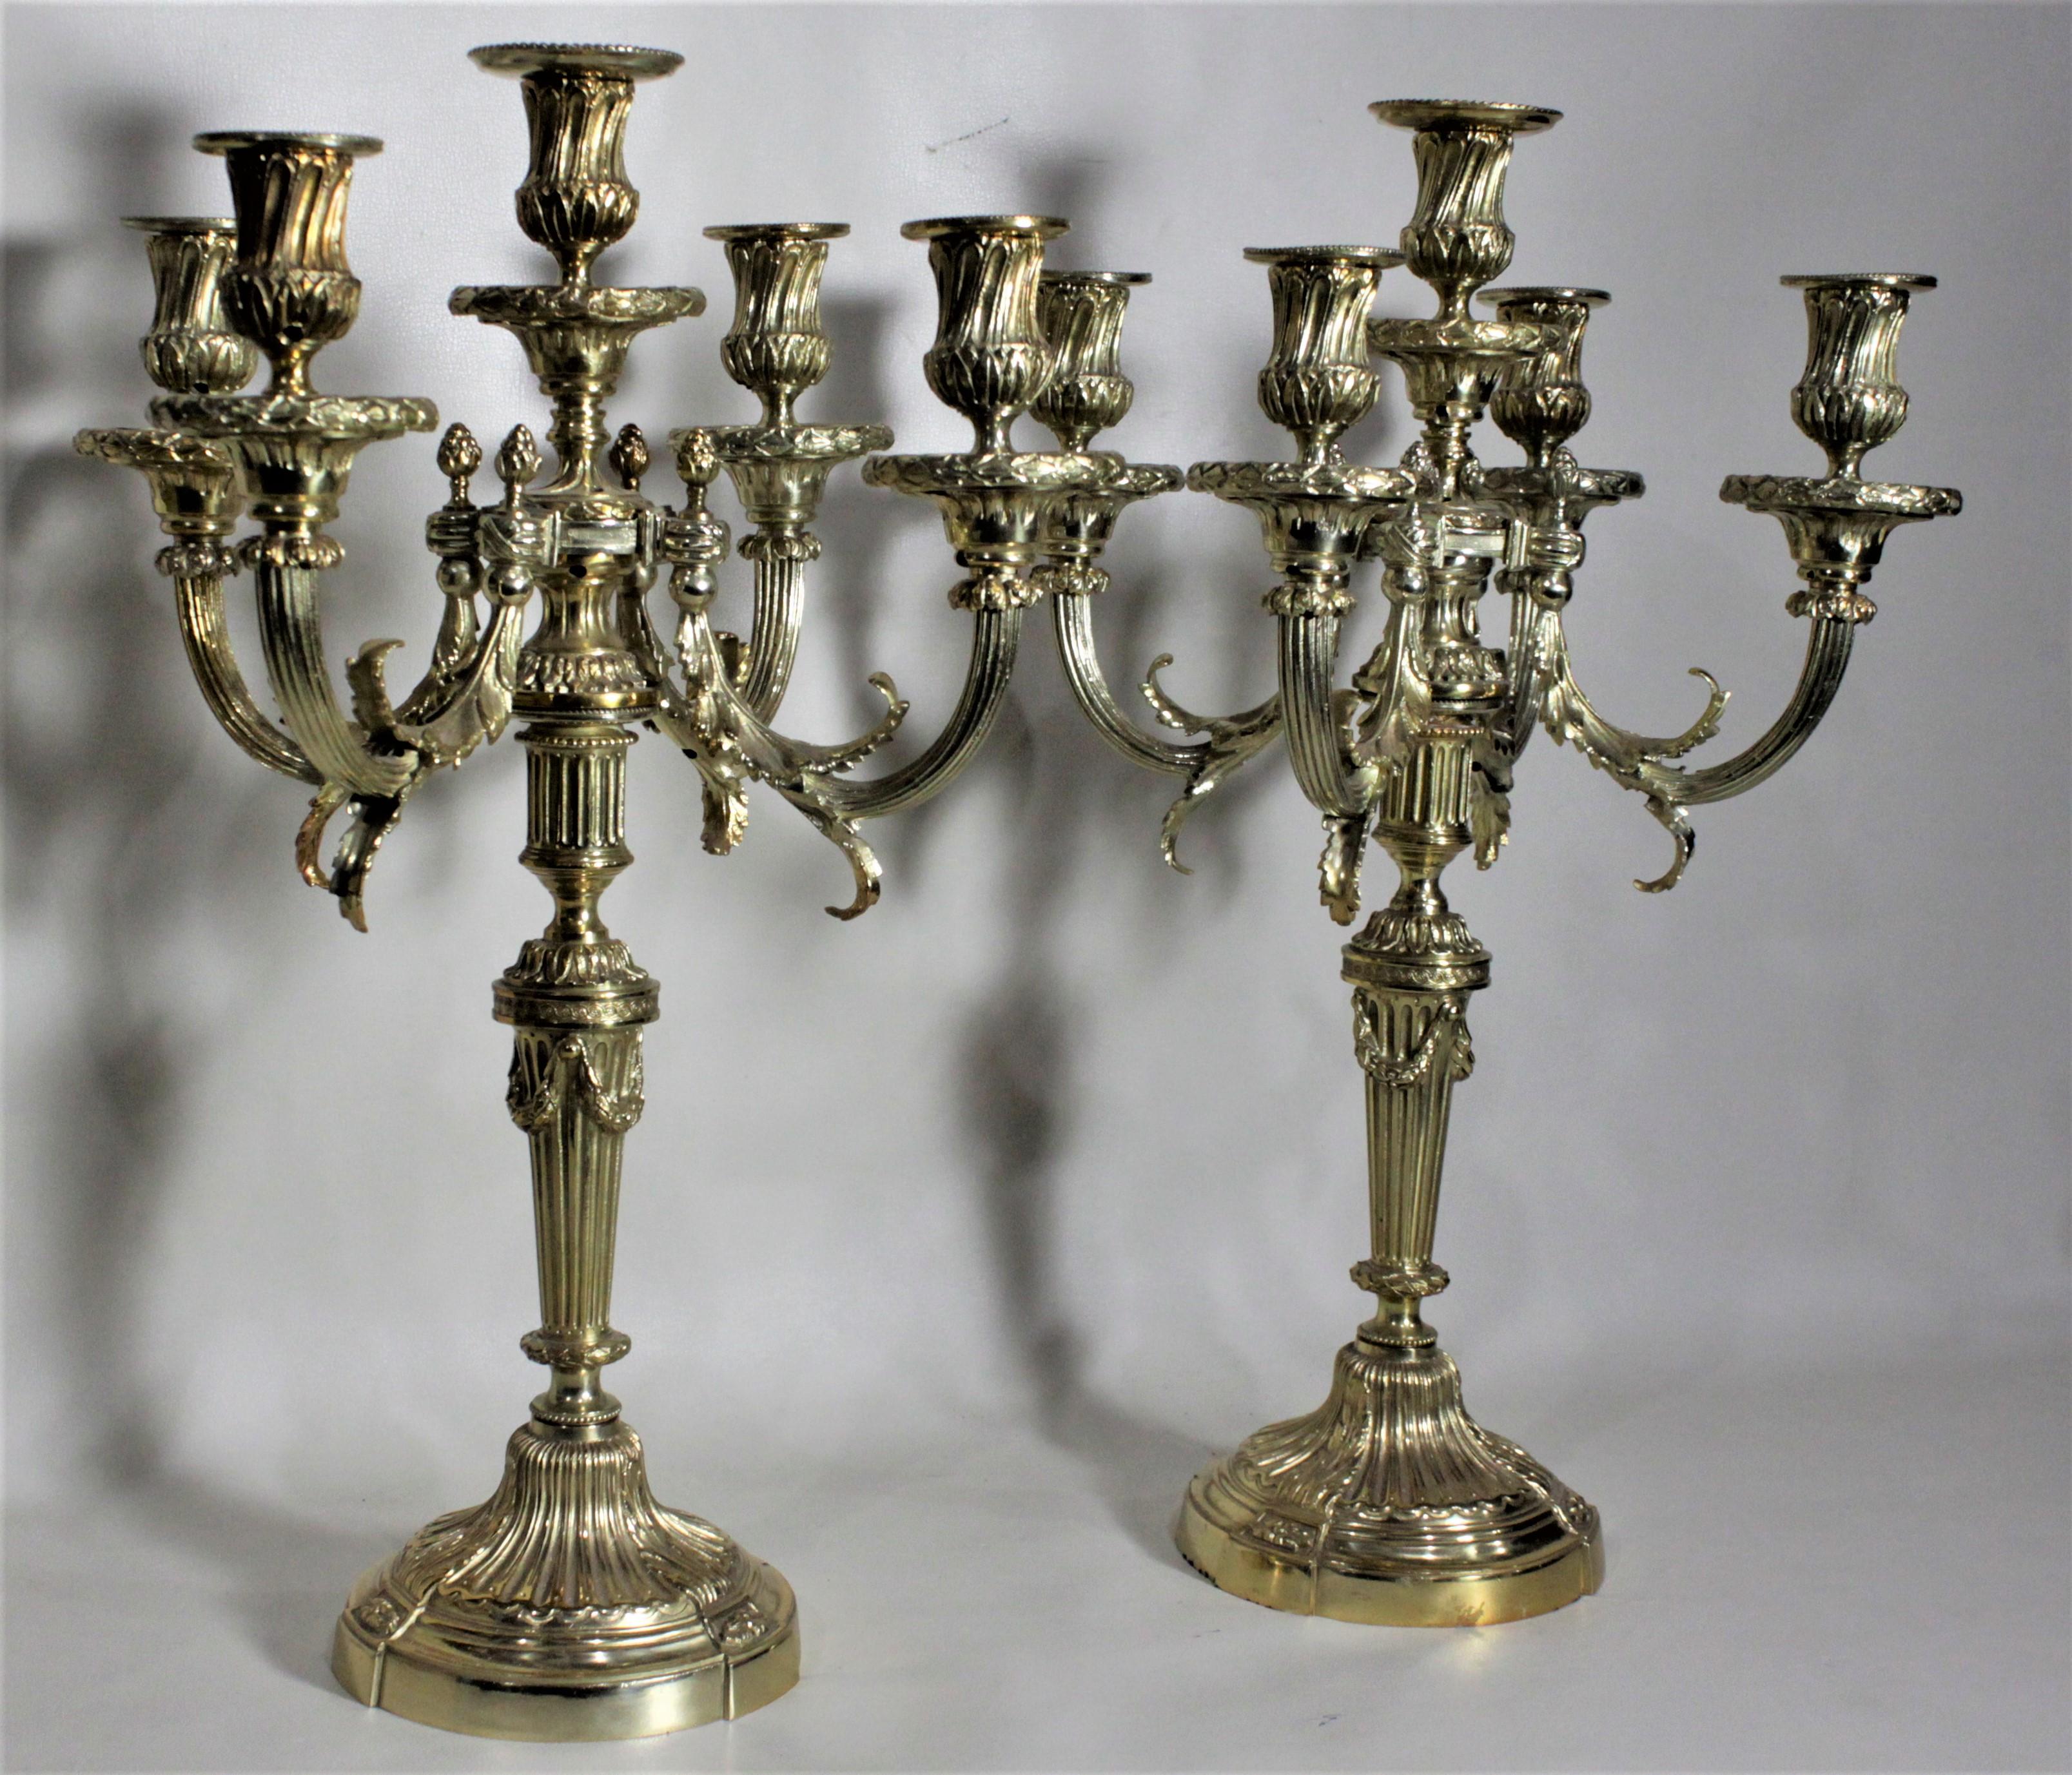 Pair of Antique Empire Style Four Branch Gilt Bronze Candelabras For Sale 1